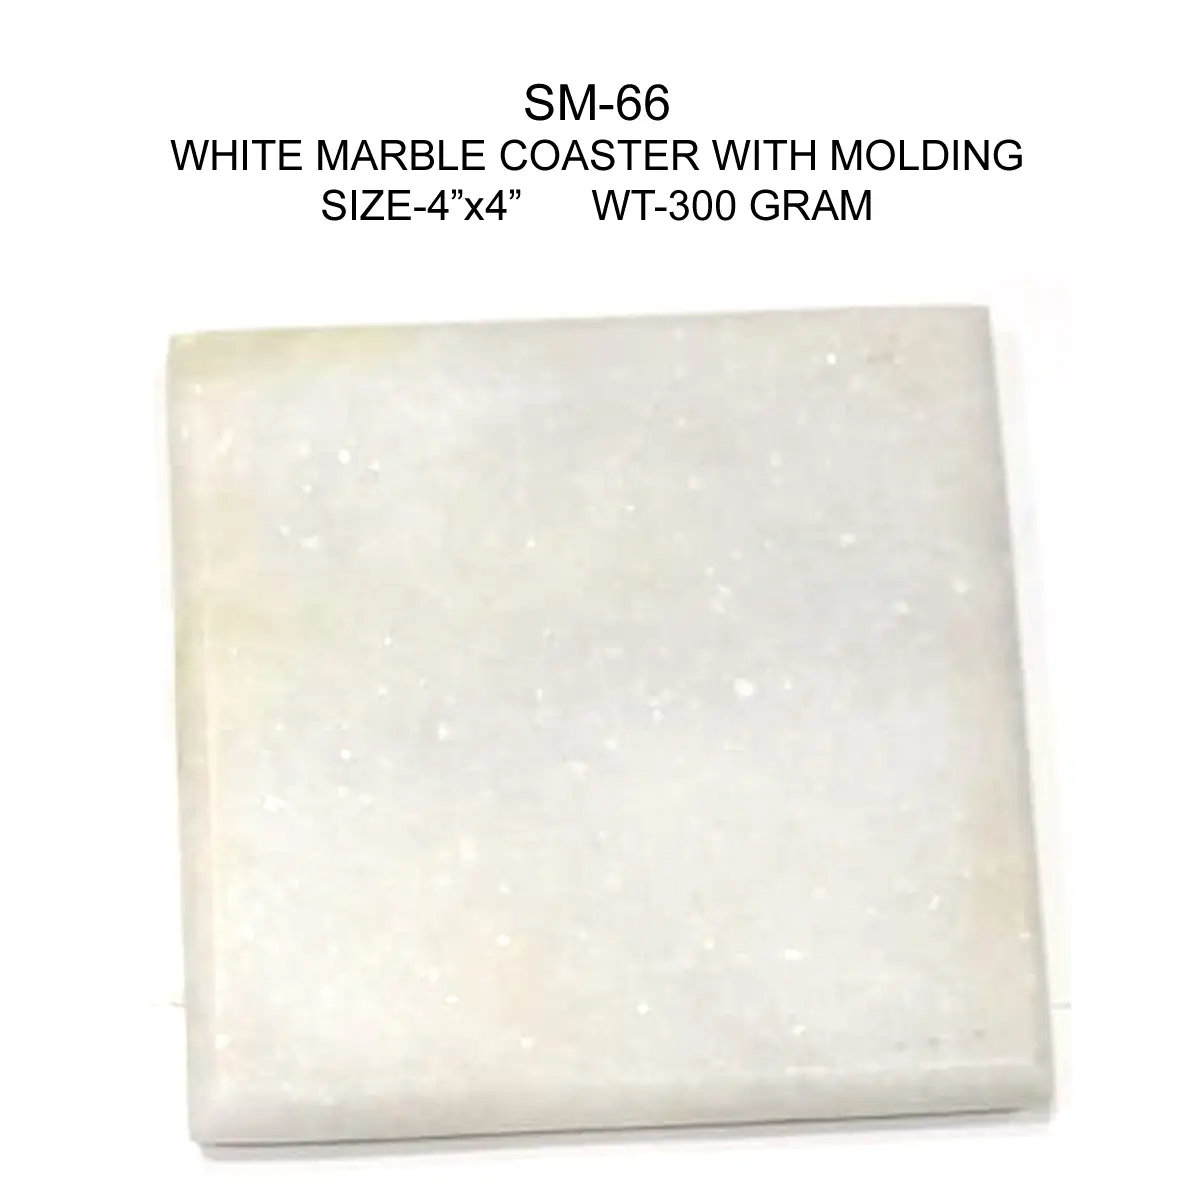 WHITE MARBLE COASTER WITH MOLDING